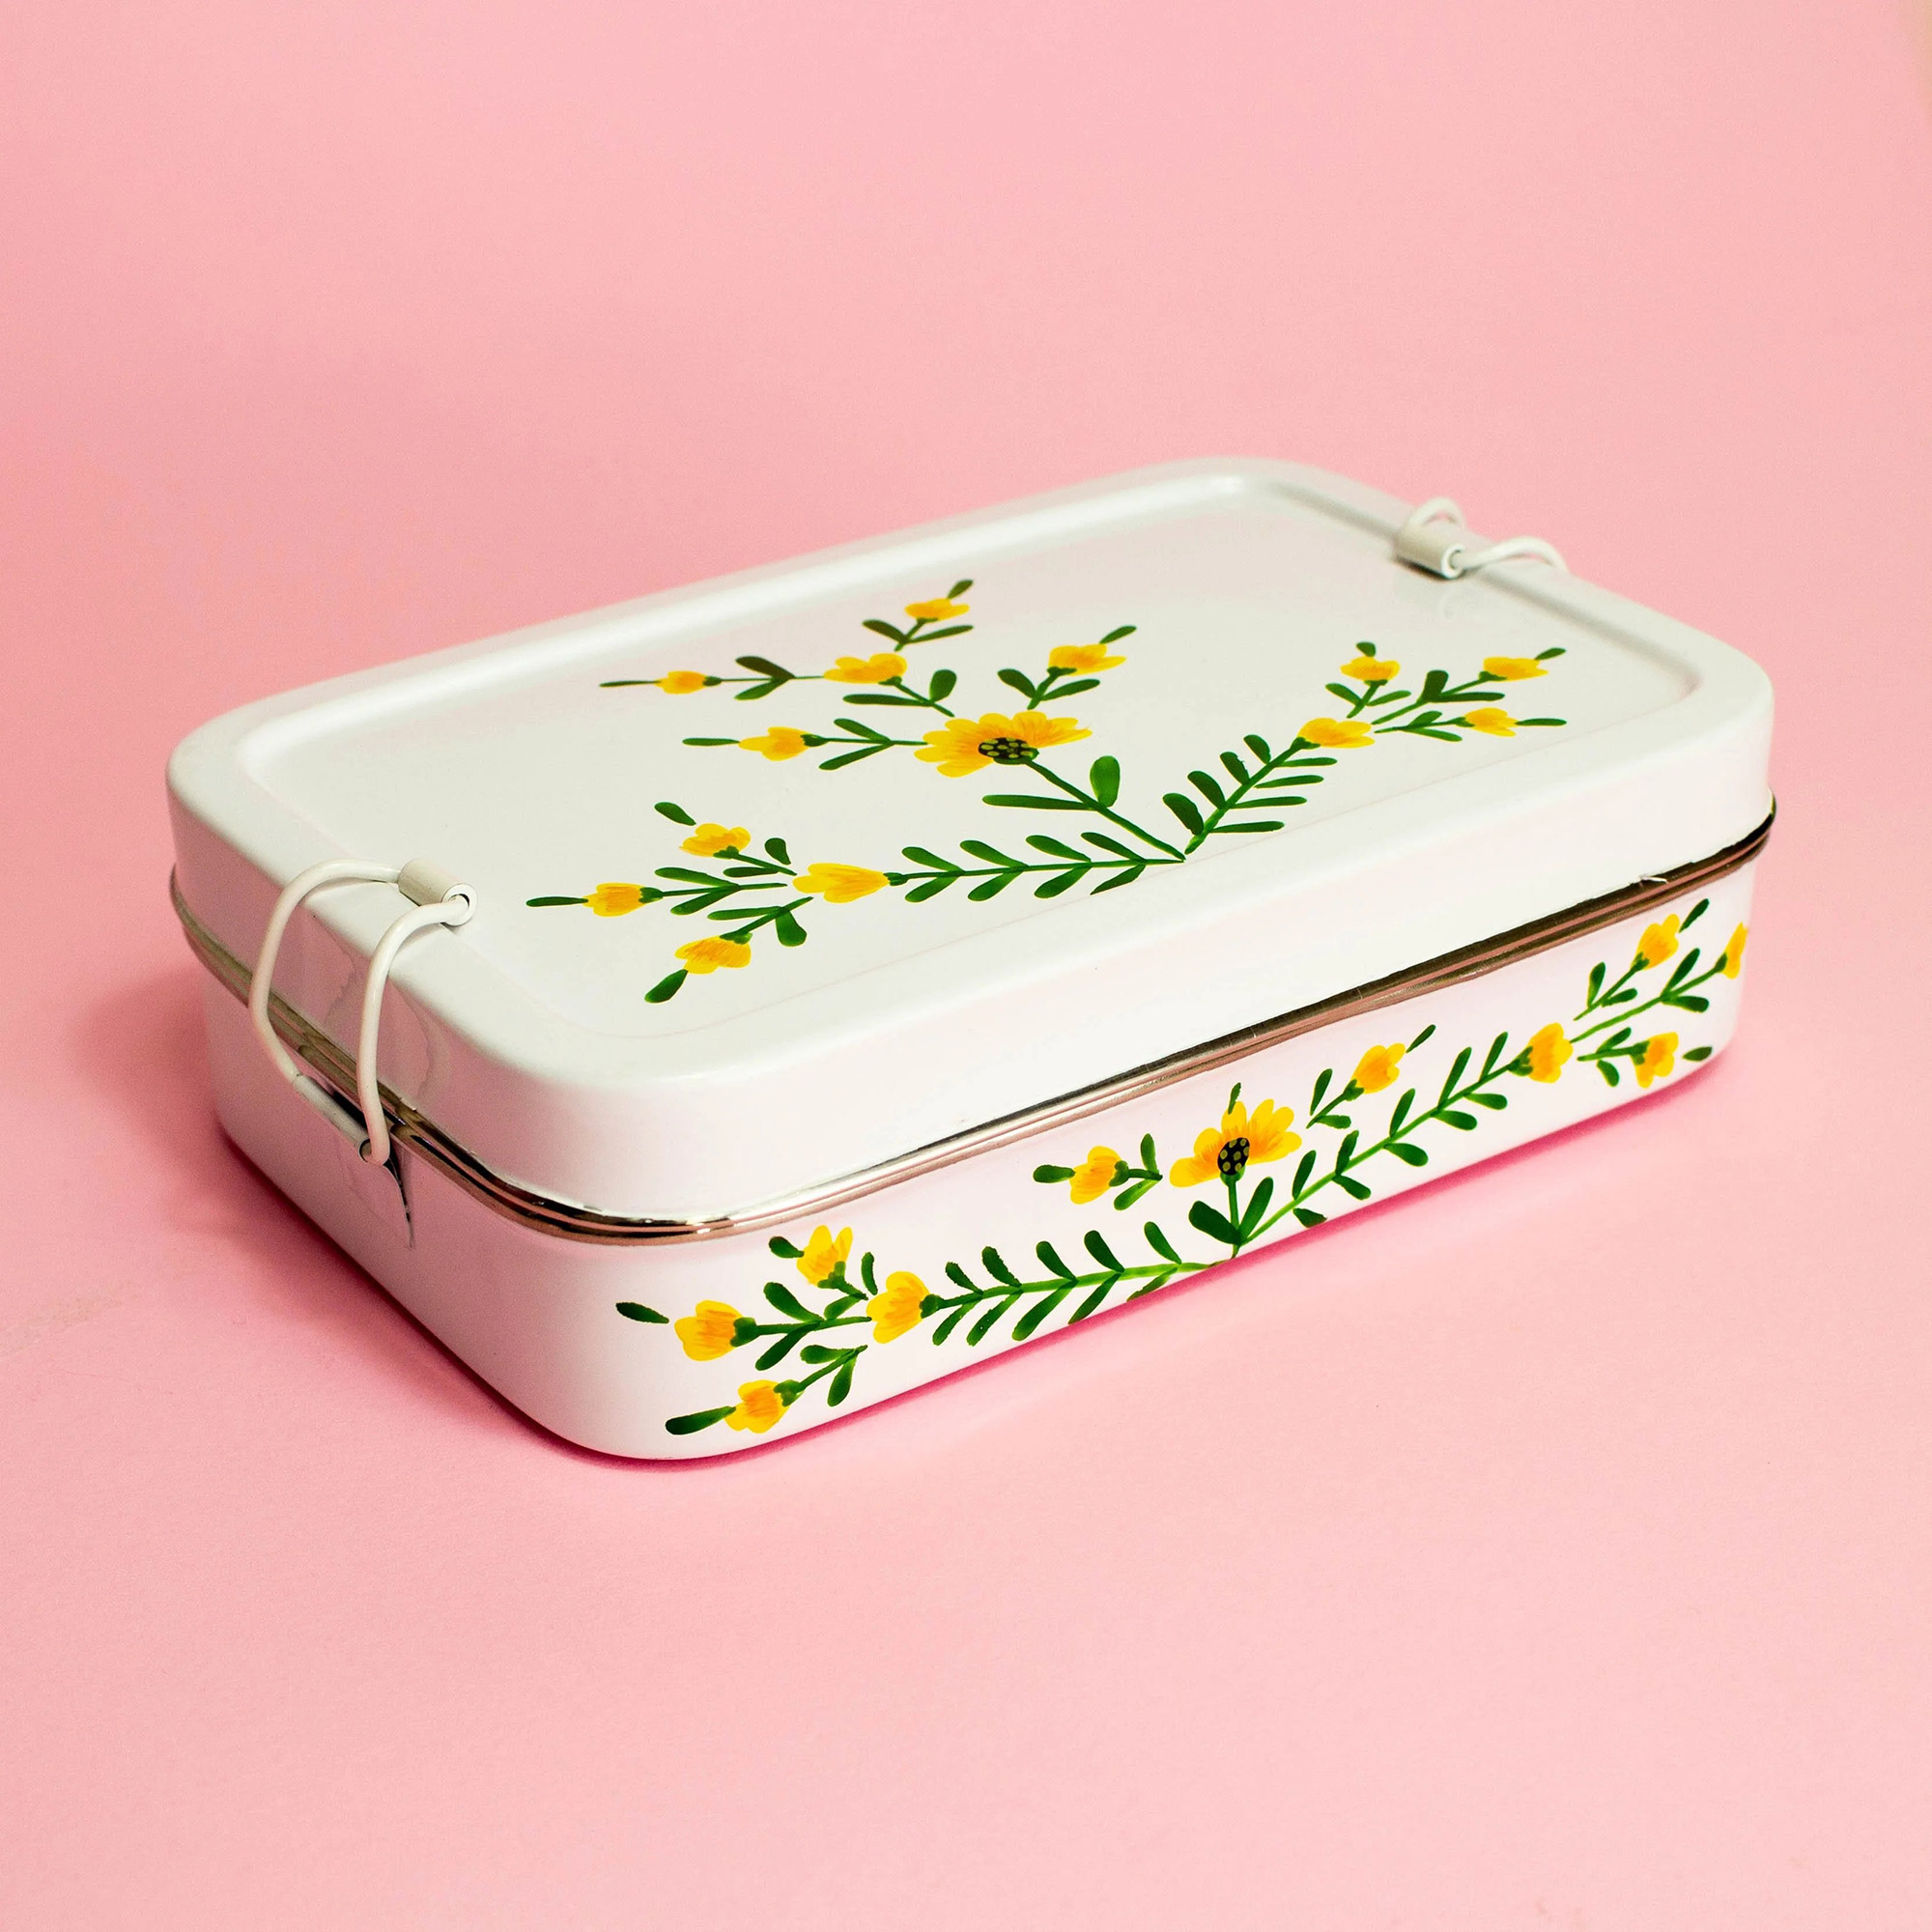 Metal lunchboxes serve up a feast of retro icons